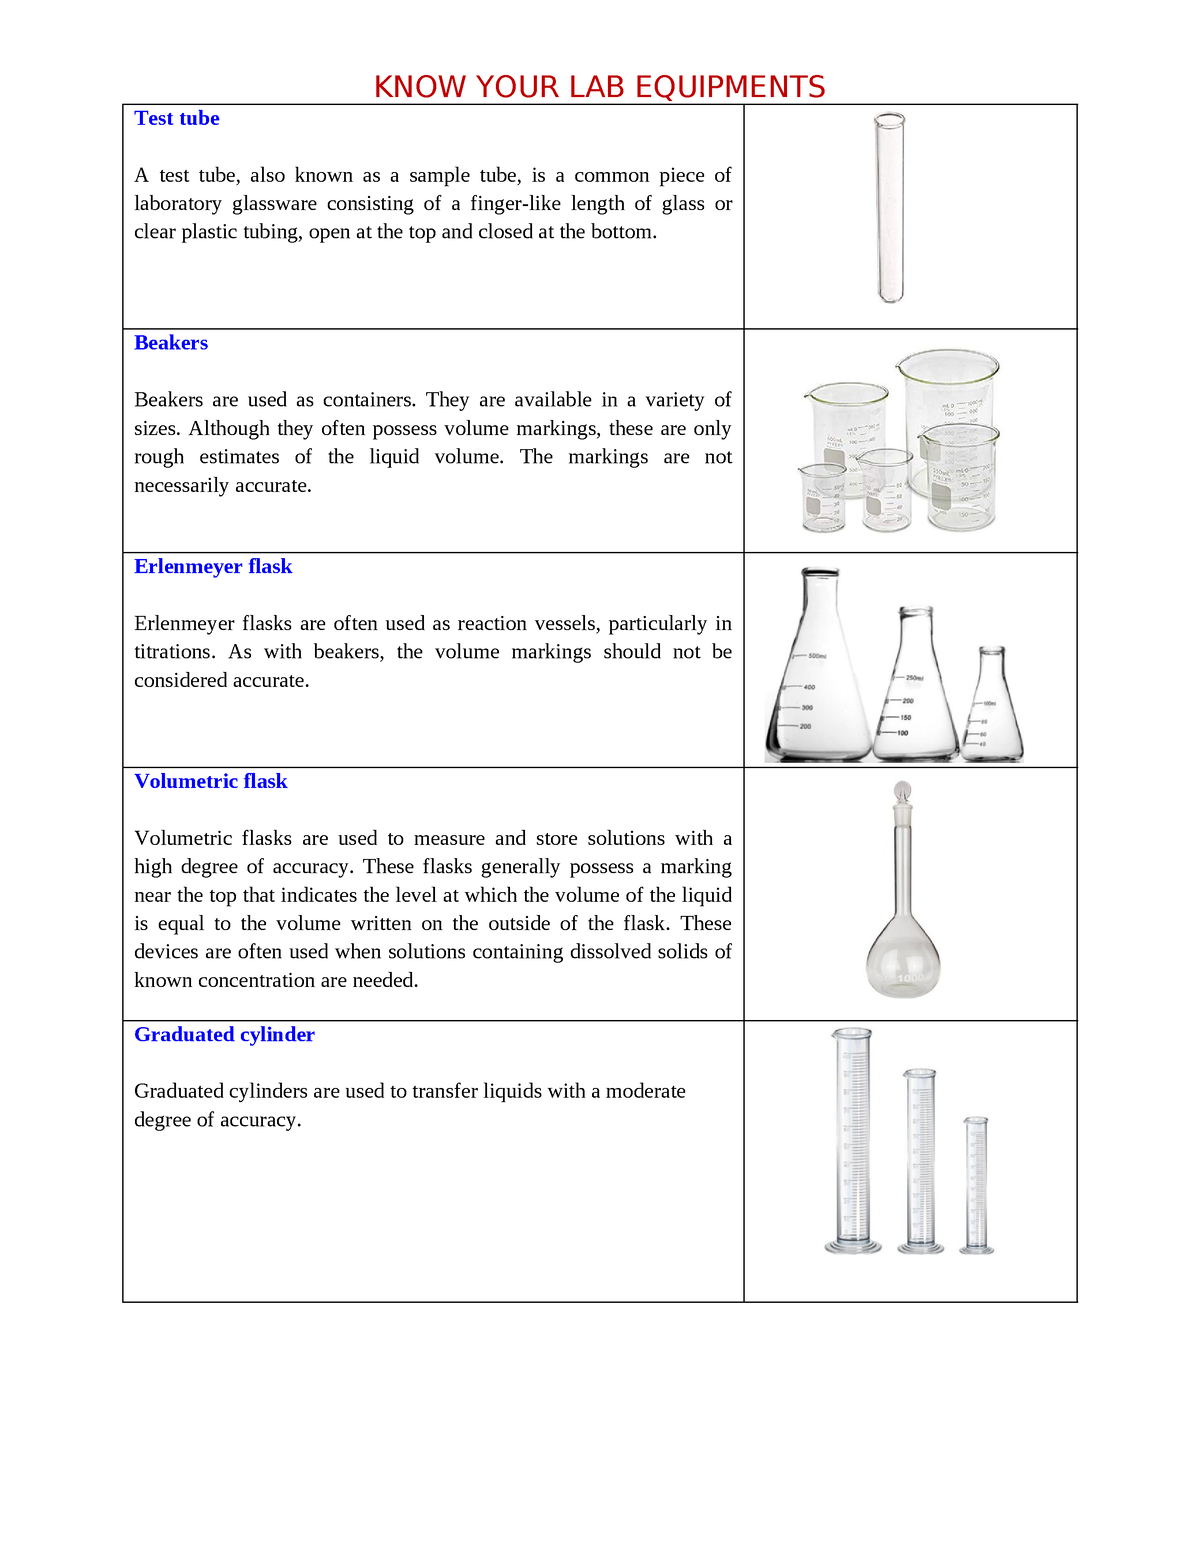 Laboratory Equipments - KNOW YOUR LAB EQUIPMENTS Test tube A test tube ...